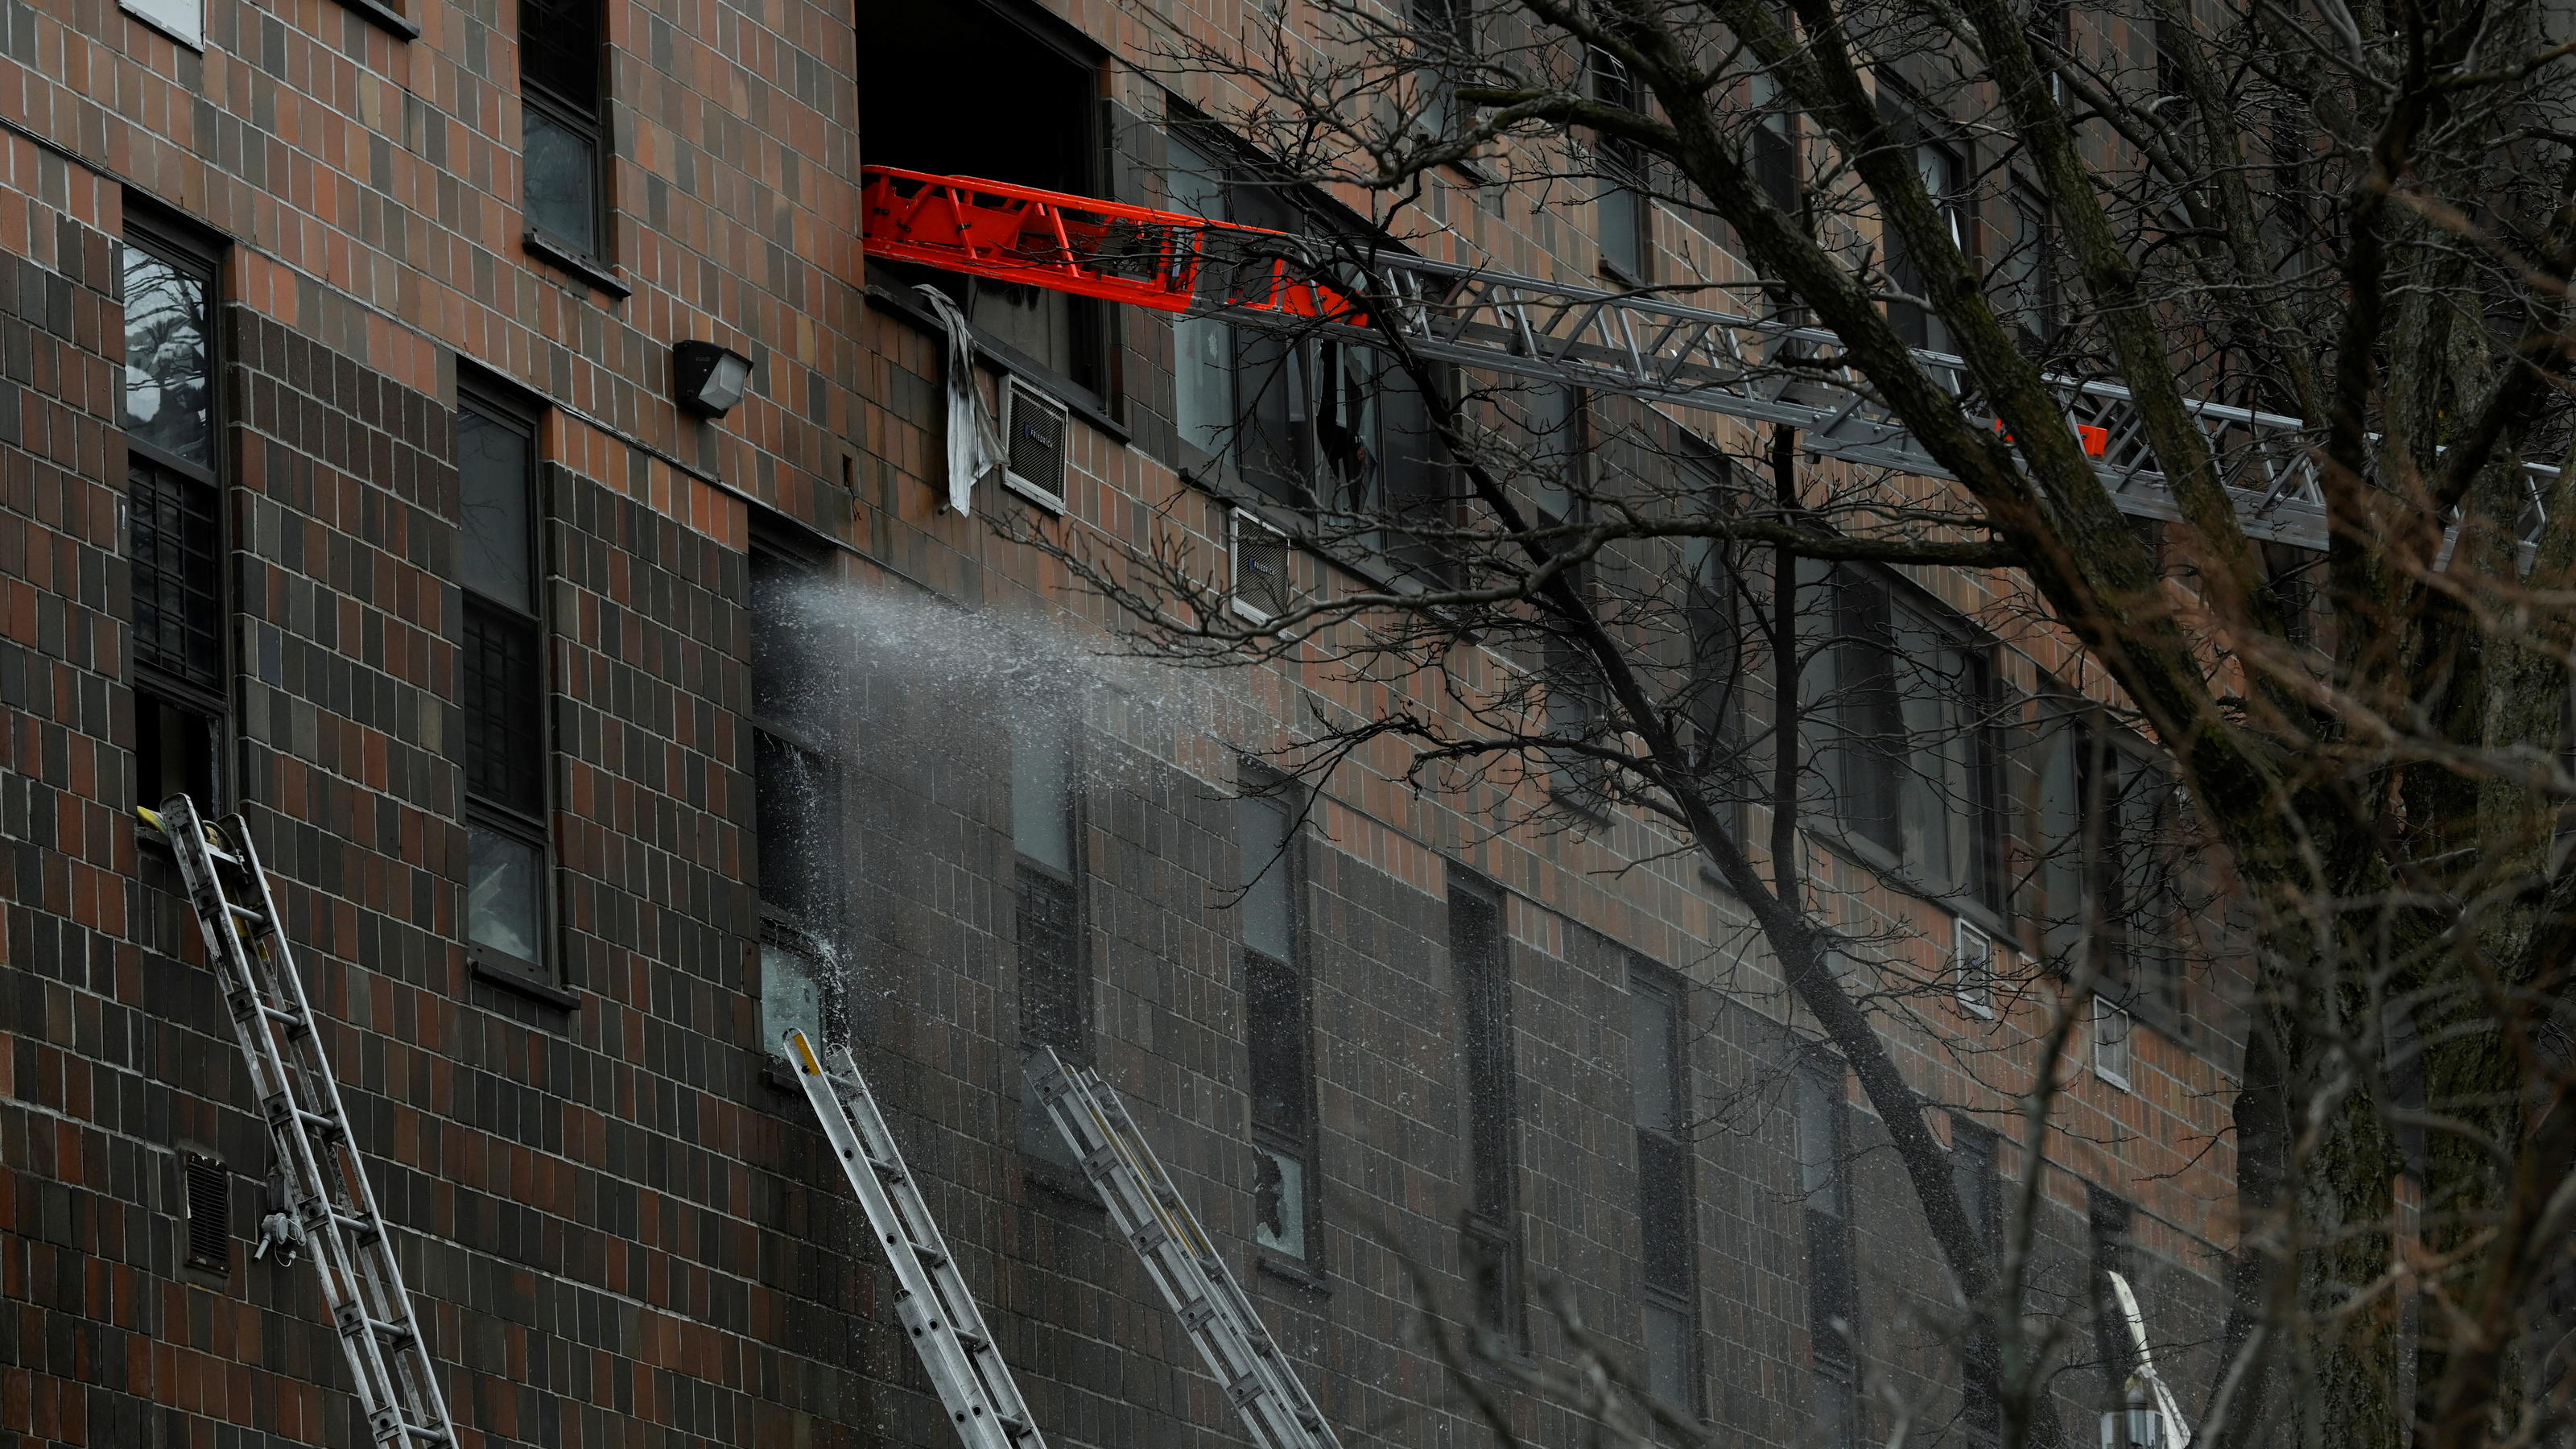 Emergency personnel from the FDNY respond to an apartment building fire in the Bronx borough of New York City, U.S., January 9, 2022.  REUTERS/Lloyd Mitchell